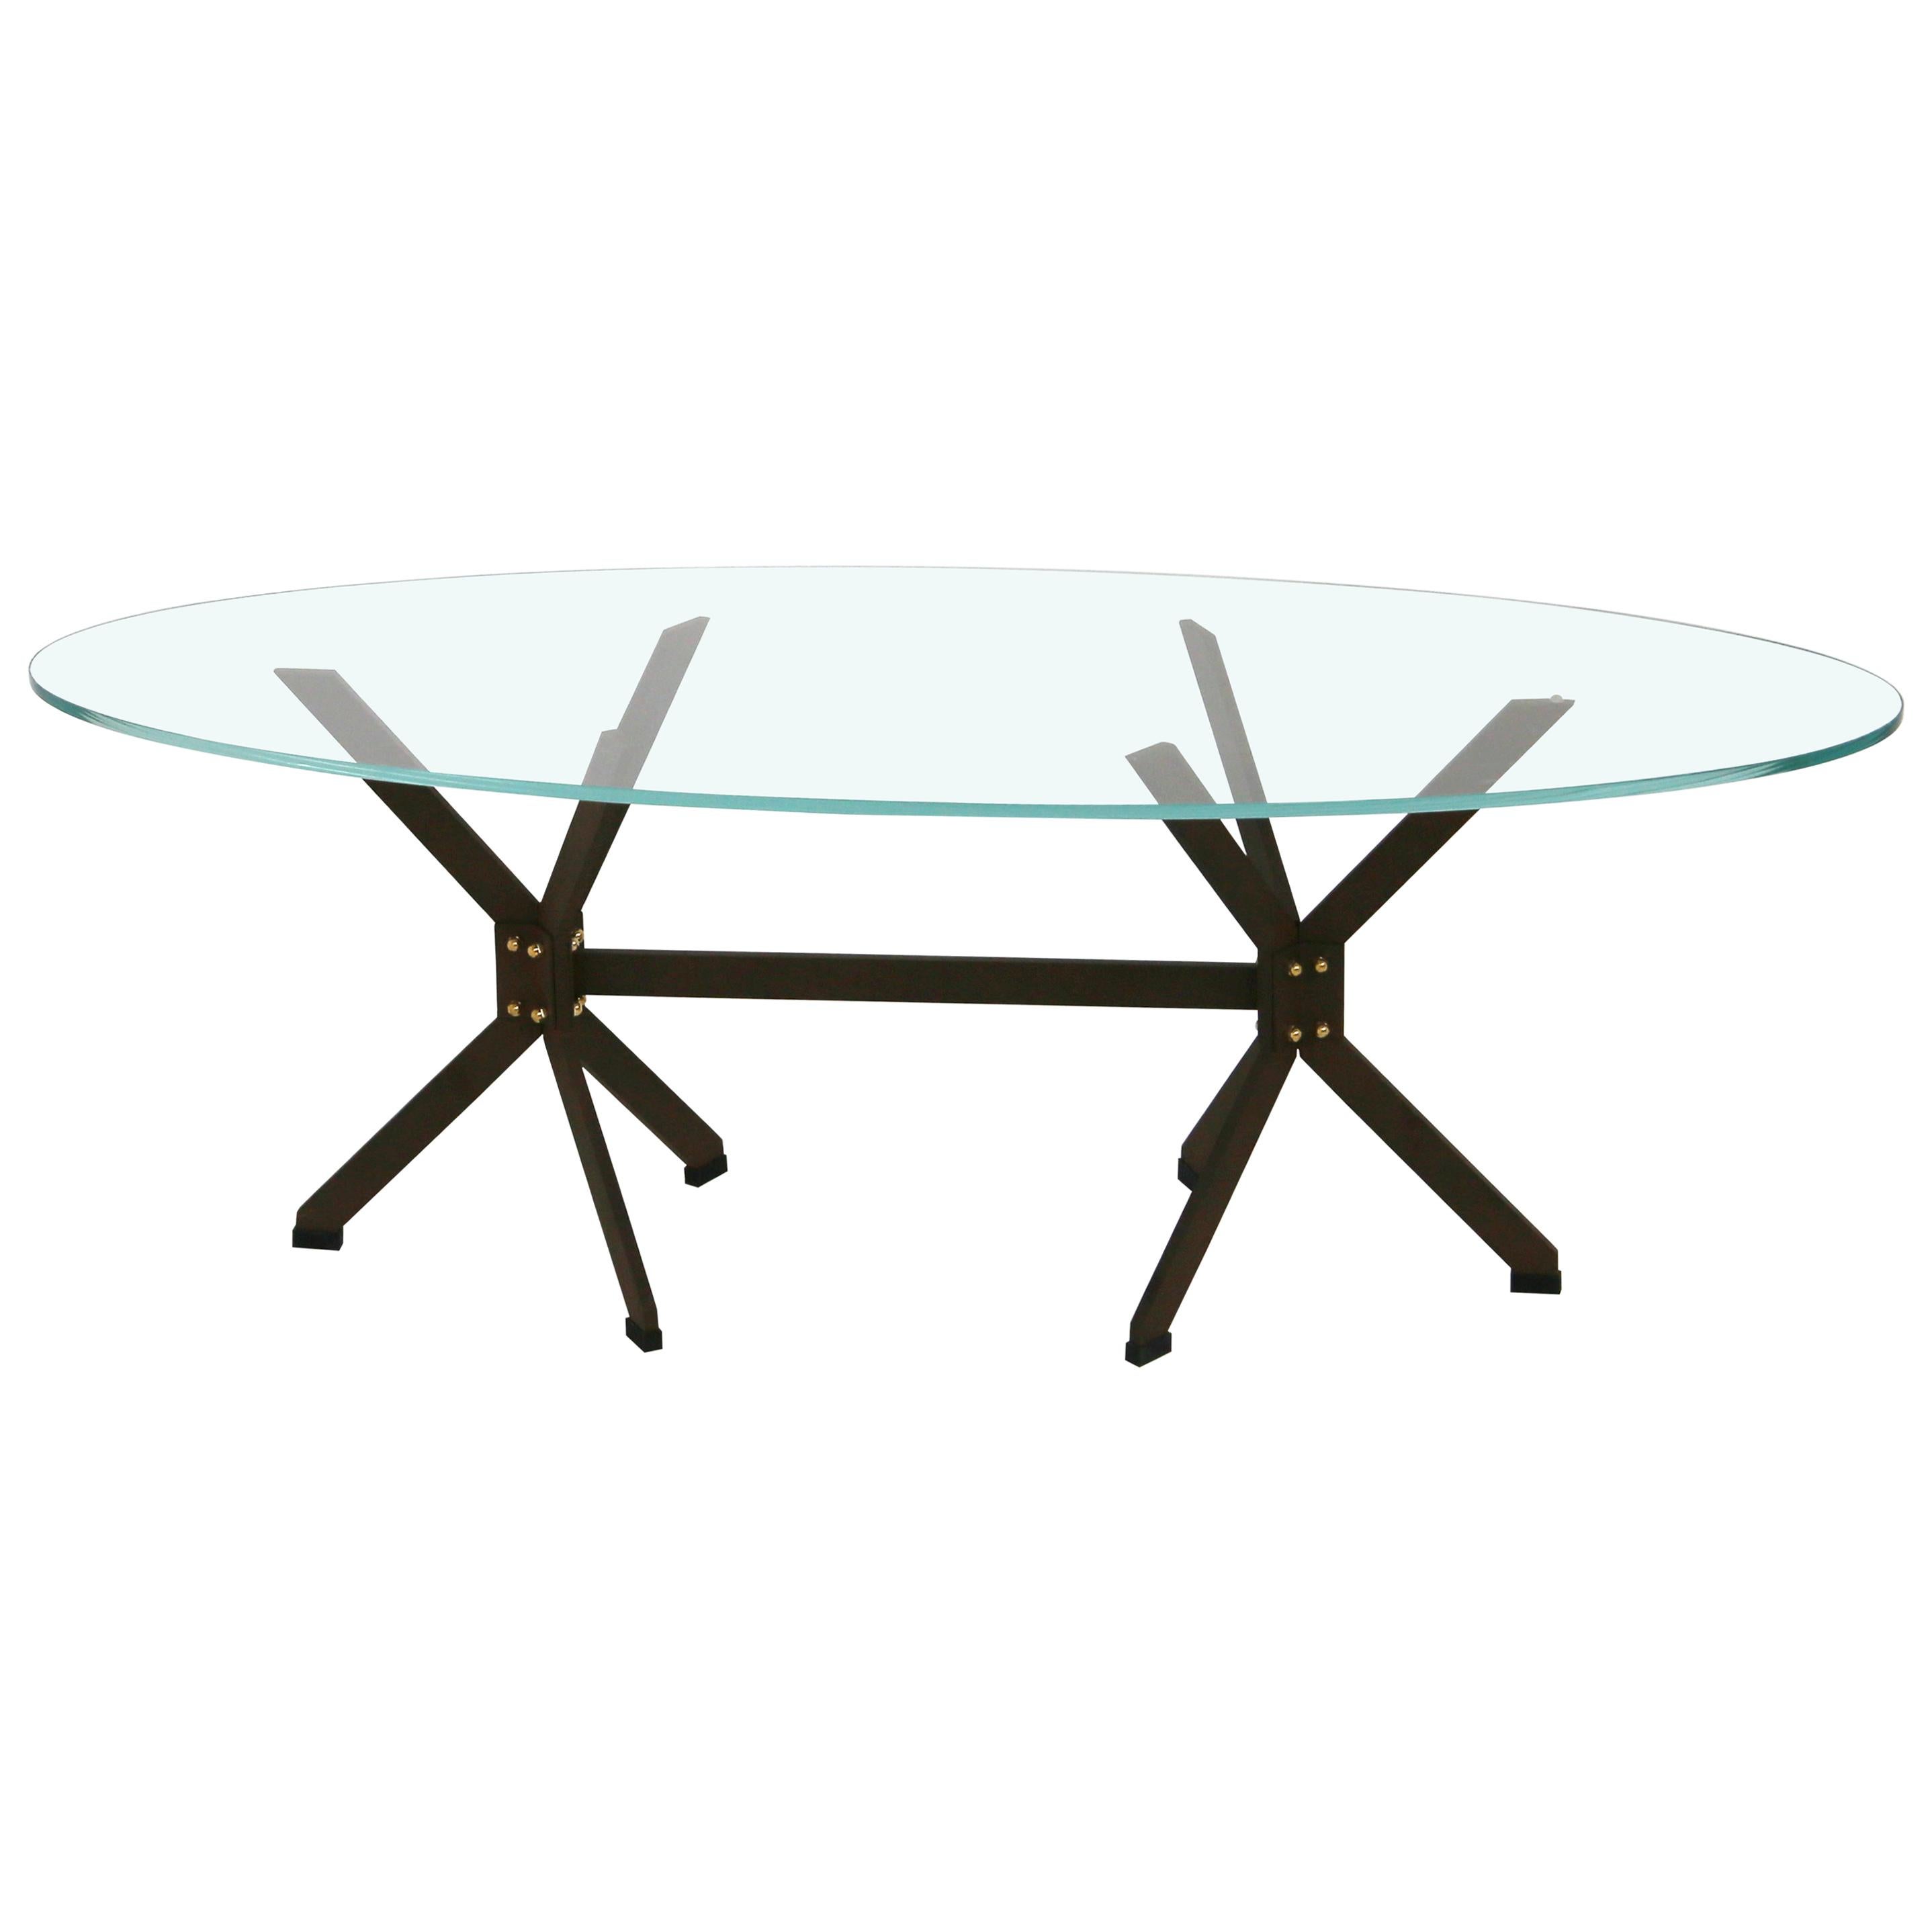 Oval Glass Table Le Zoie Designed by Michele Dal Bon